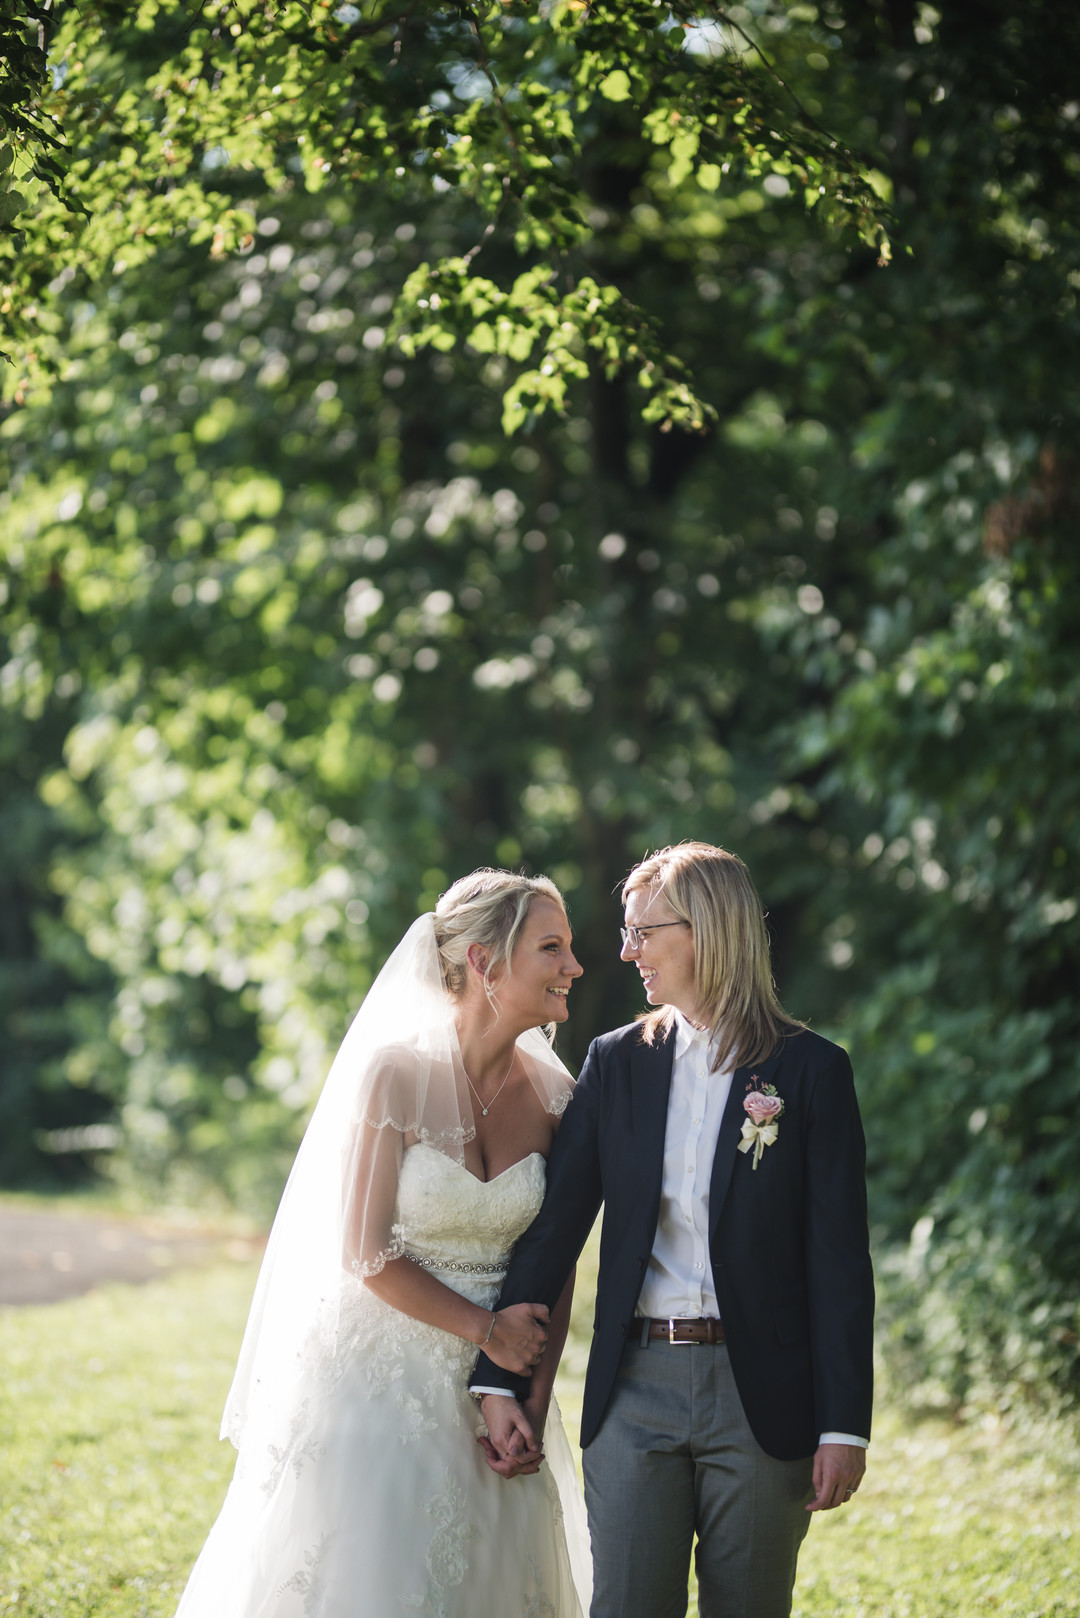 Rustic wedding in Columbus, Ohio two brides long white dress black suit outside trees nature